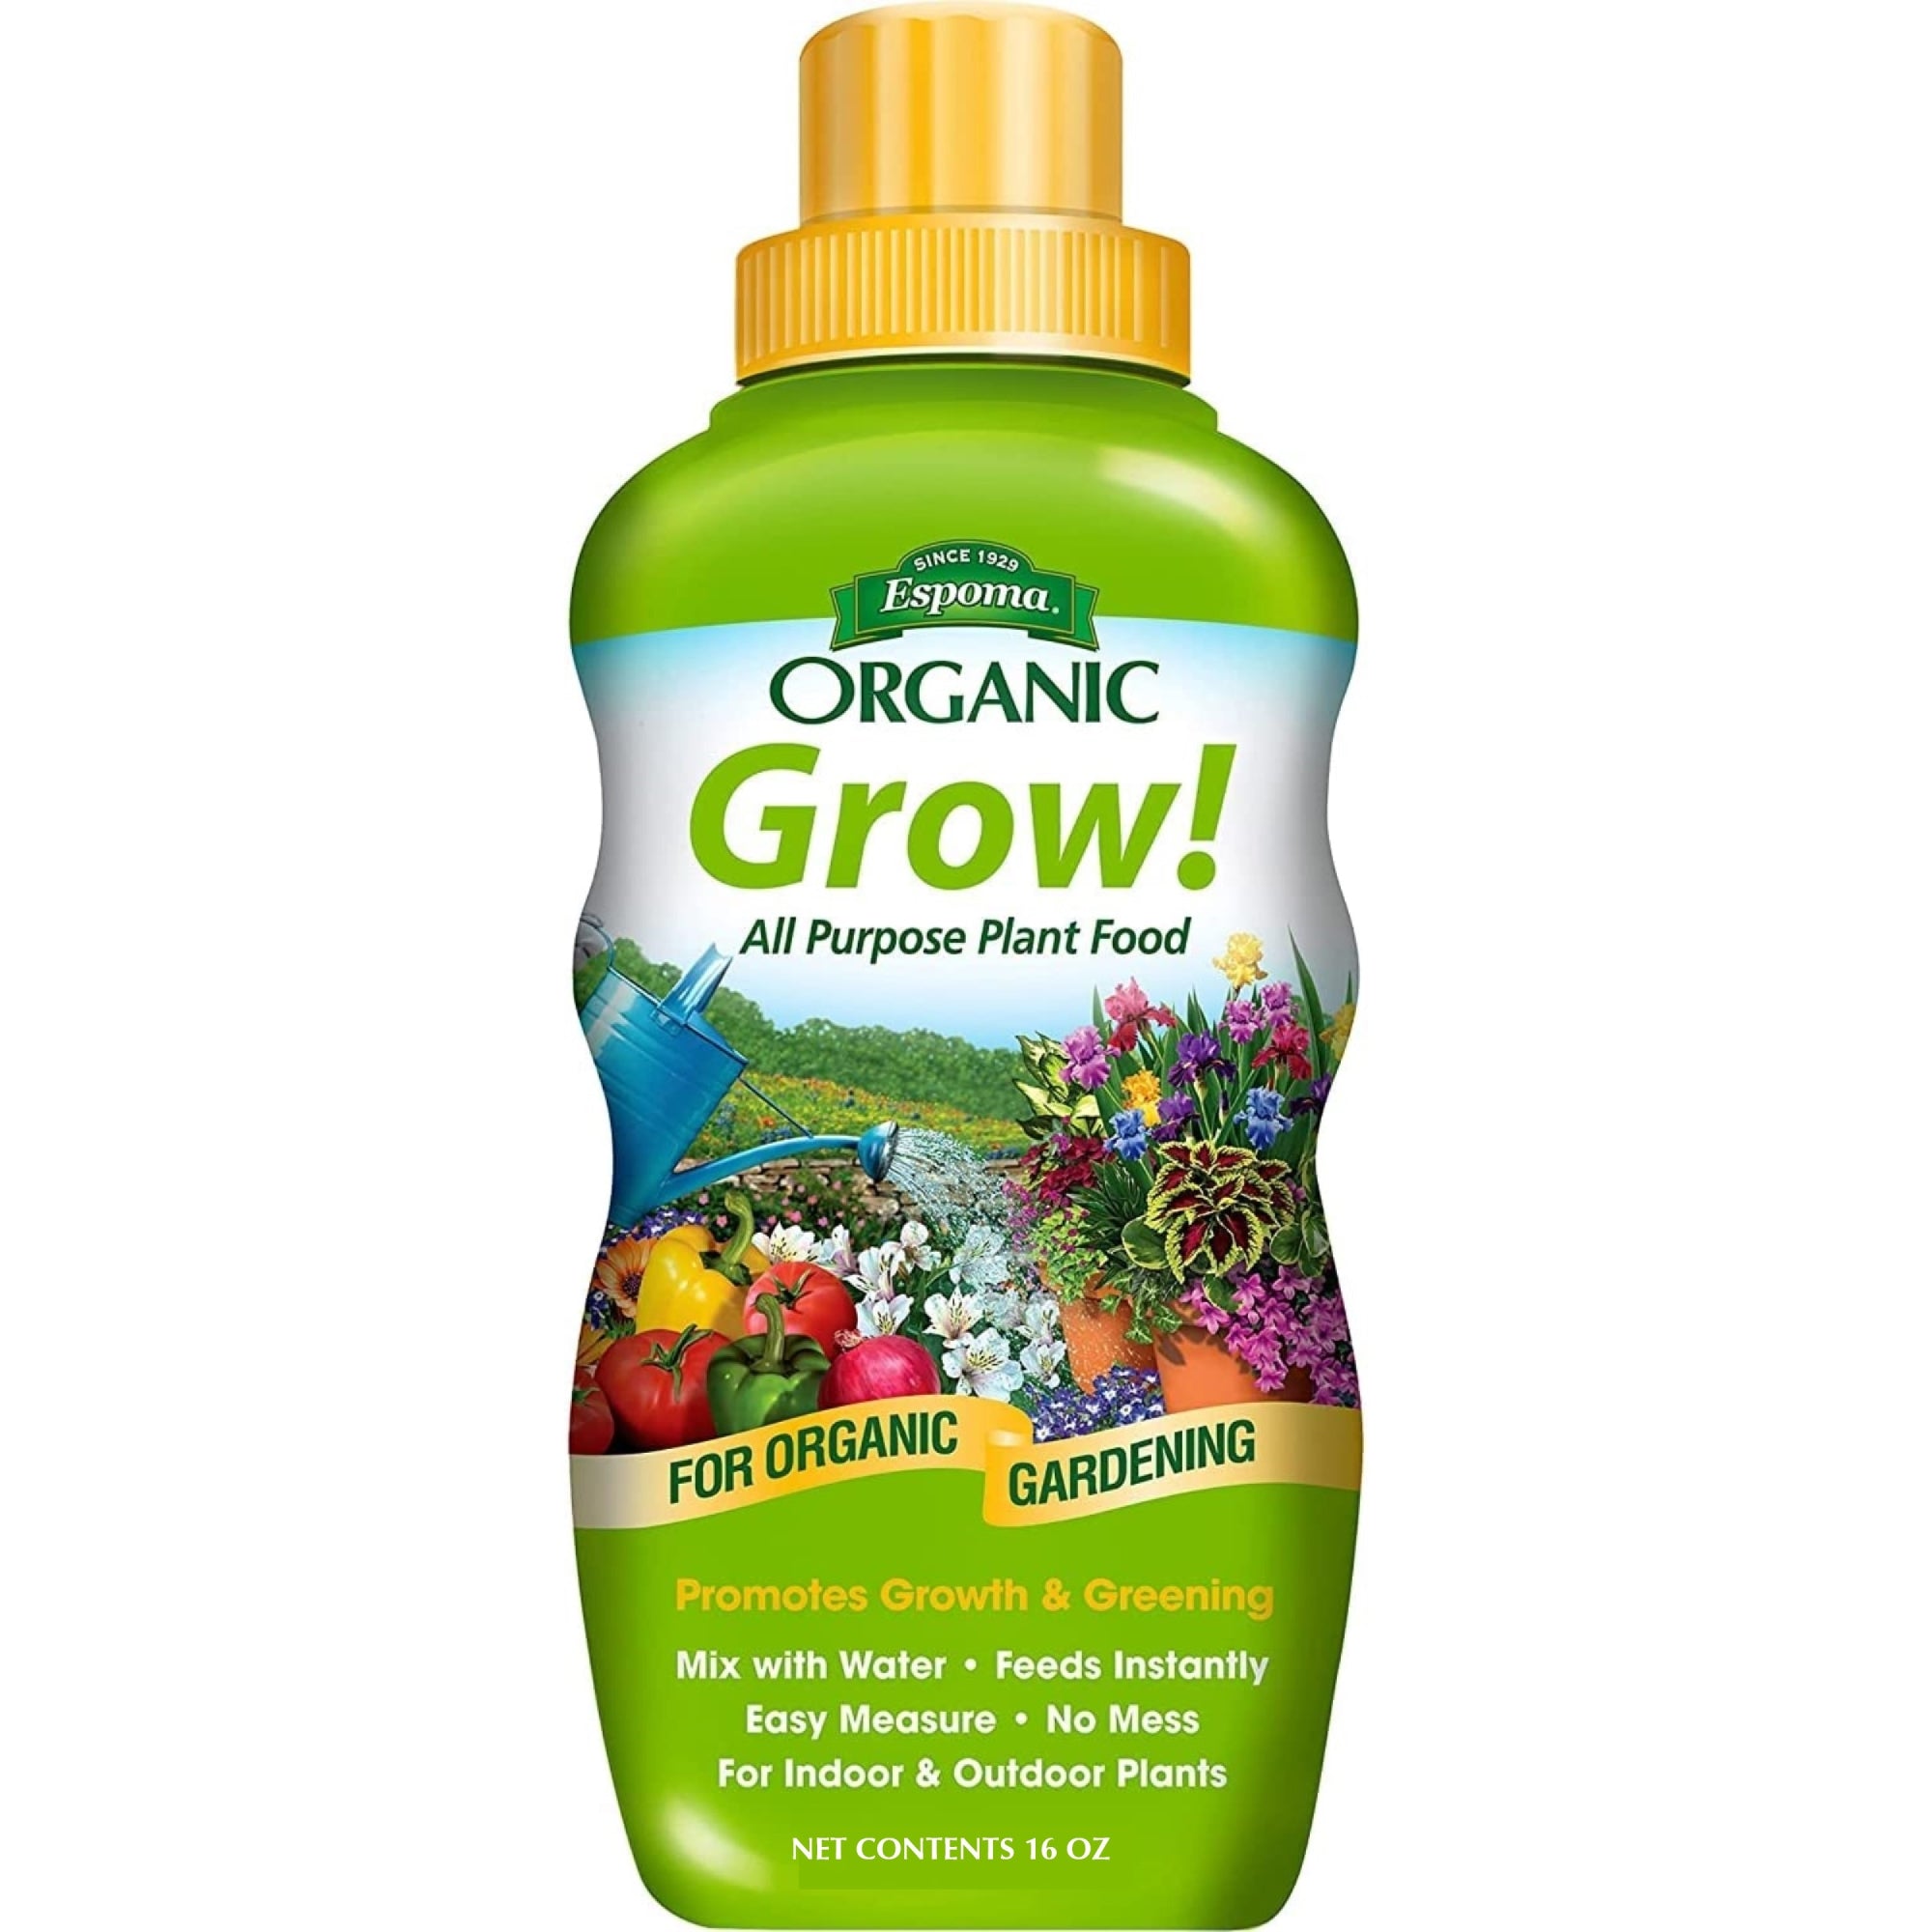 Espoma Organic Grow! All Purpose Plant Food for Indoor & Outdoor Plants for Organic Gardening, Liquid Concentrate, 16 fl oz